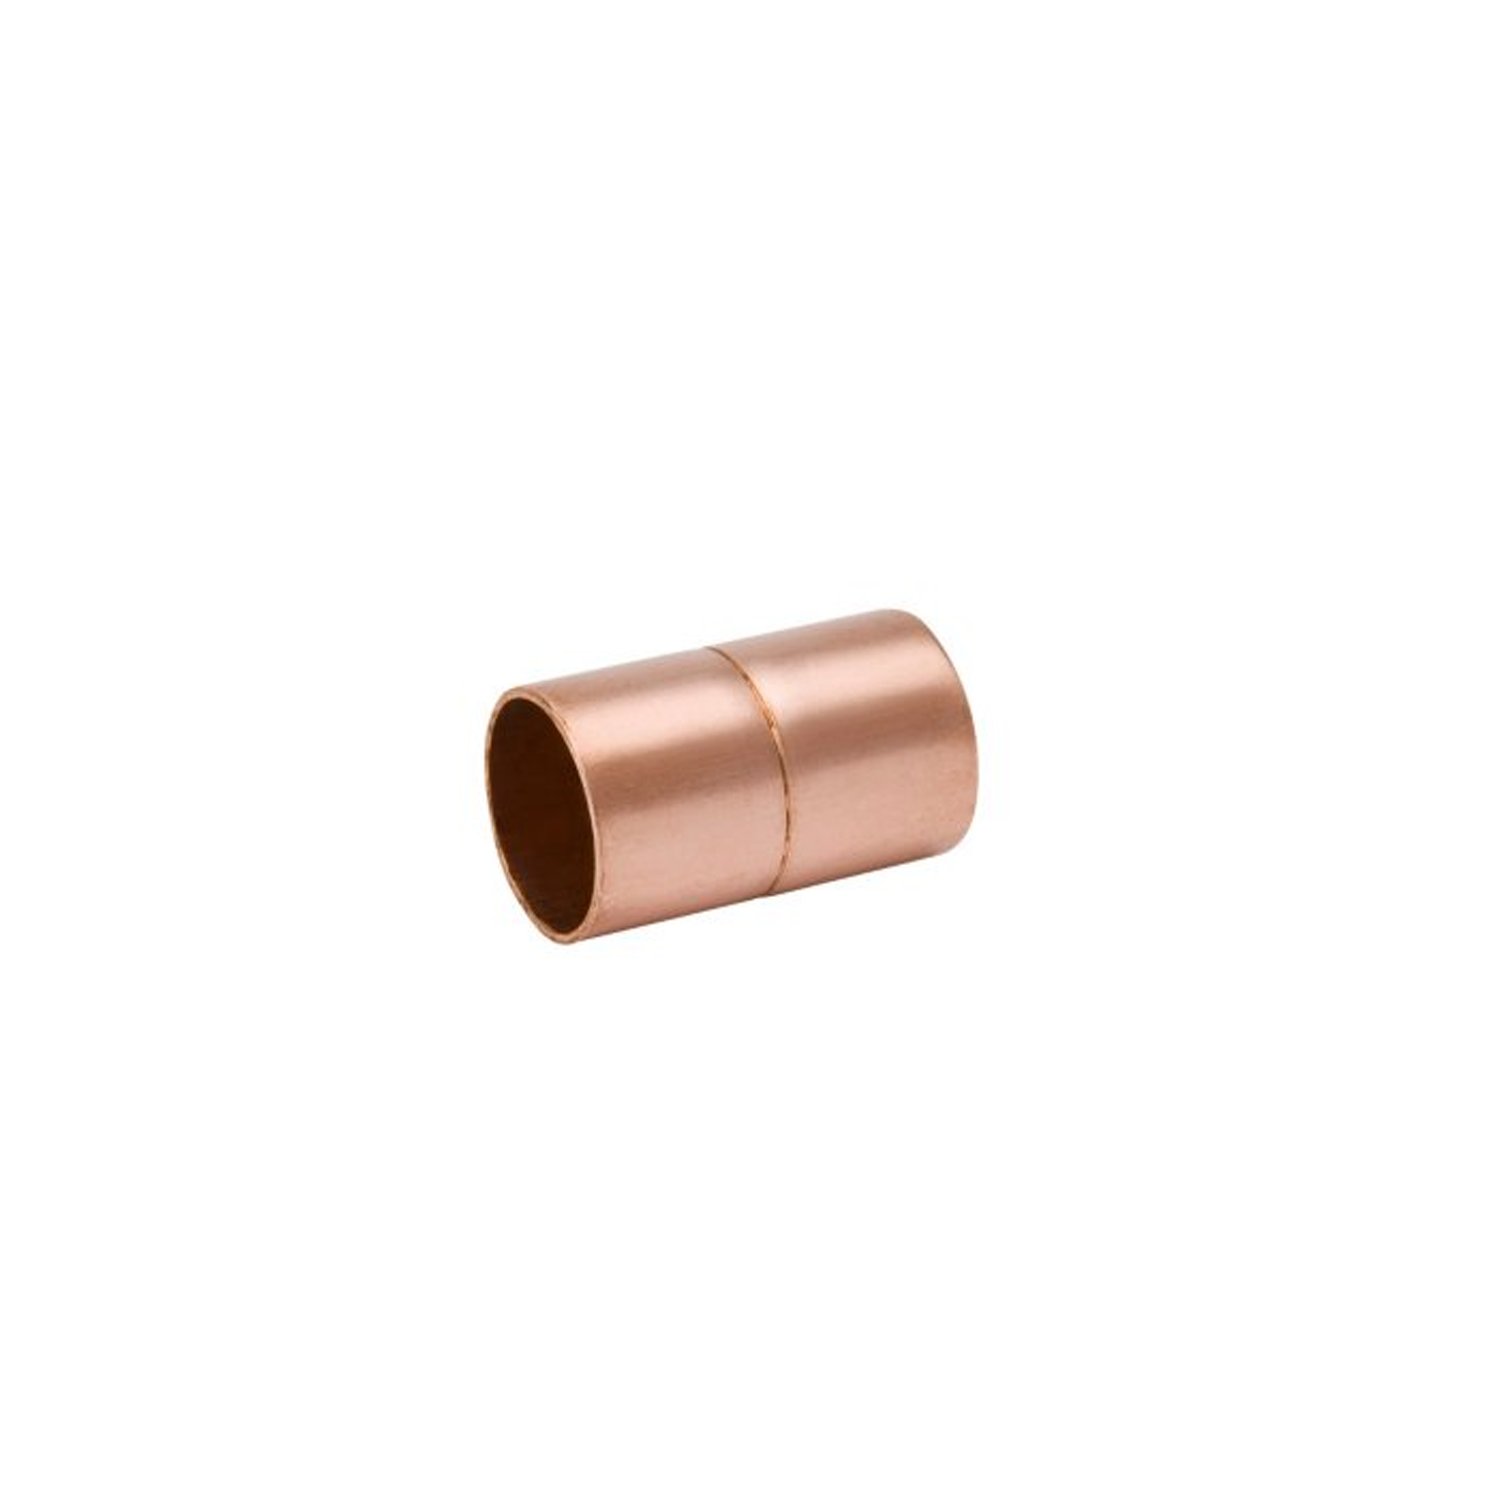 Sleeve 1/4 "x 1/4" ODF, with ring stop, Cu